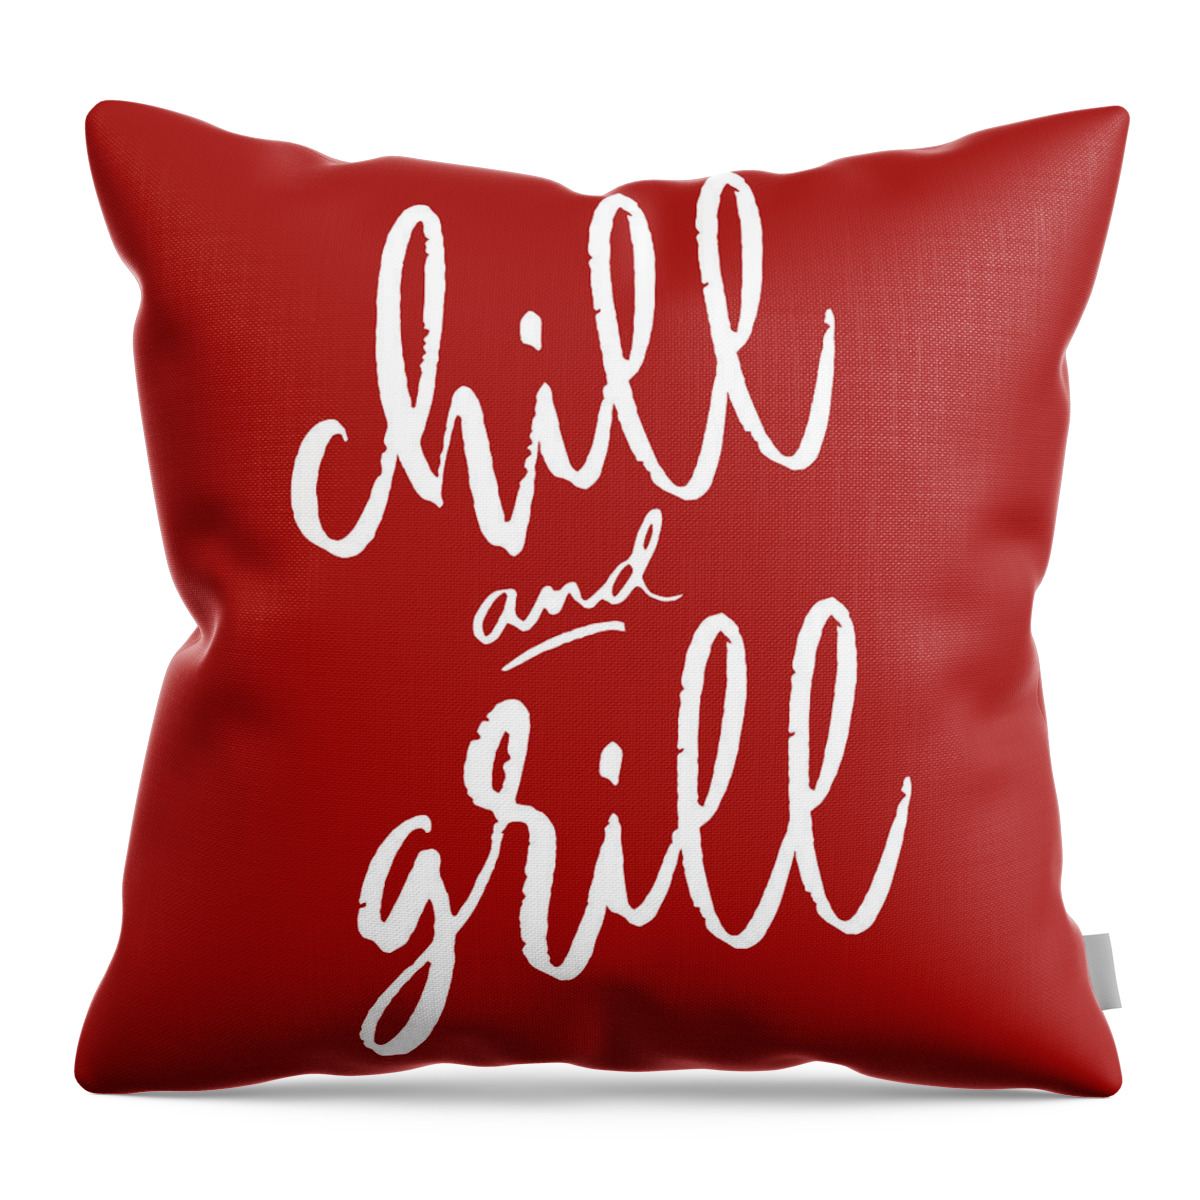 Chill Throw Pillow featuring the mixed media Chill And Grill by Sd Graphics Studio